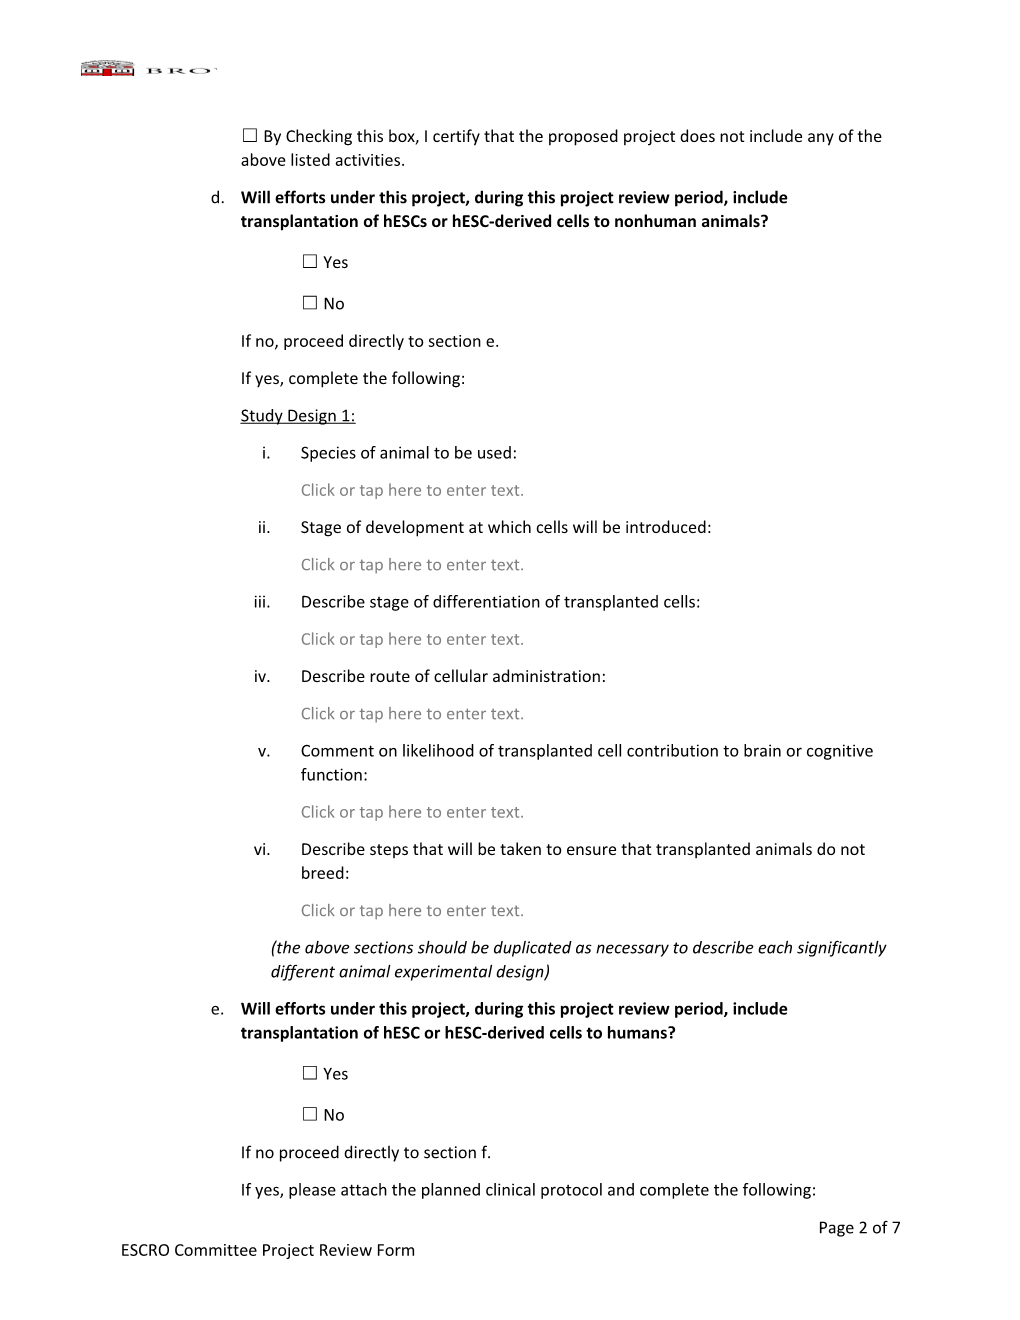 Brown University ESCRO Committee Project Review Form